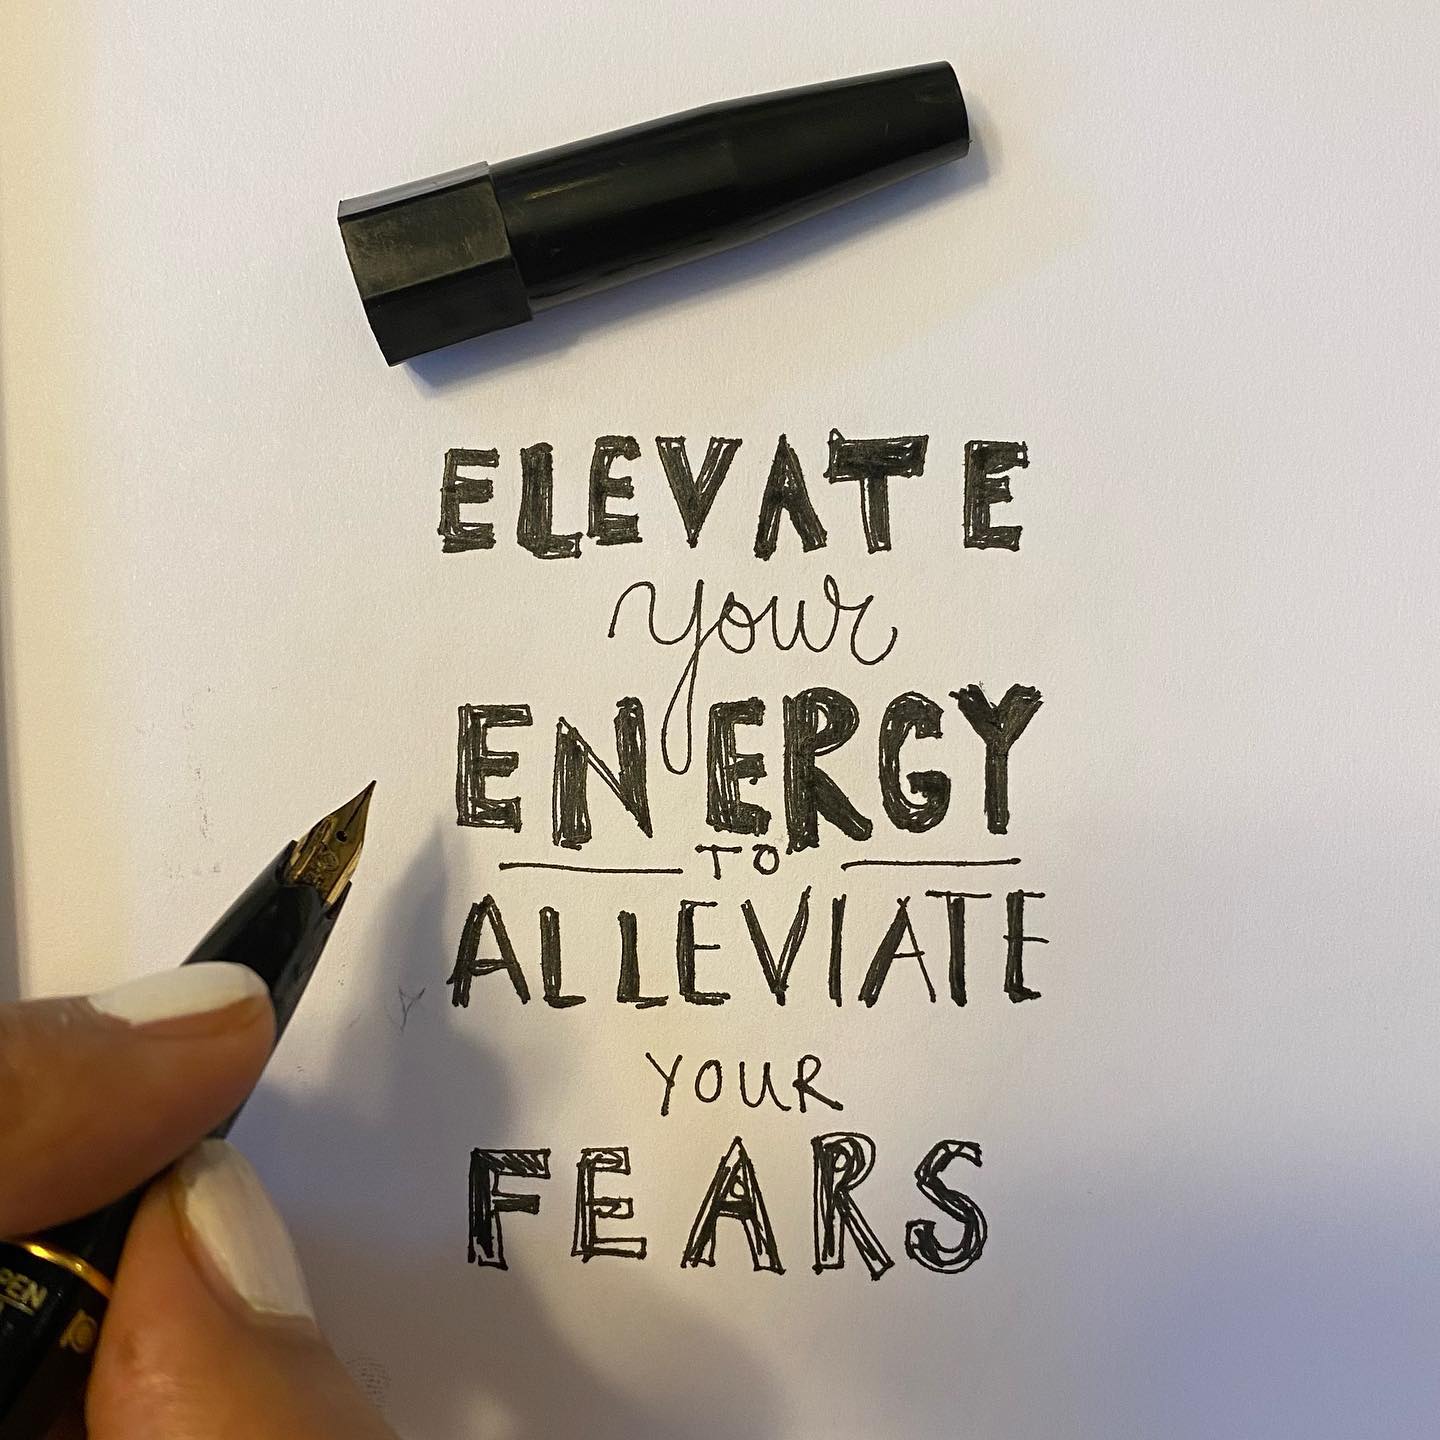 Take ownership of the energy you put out into the world. Operate from a level that lights up the world!